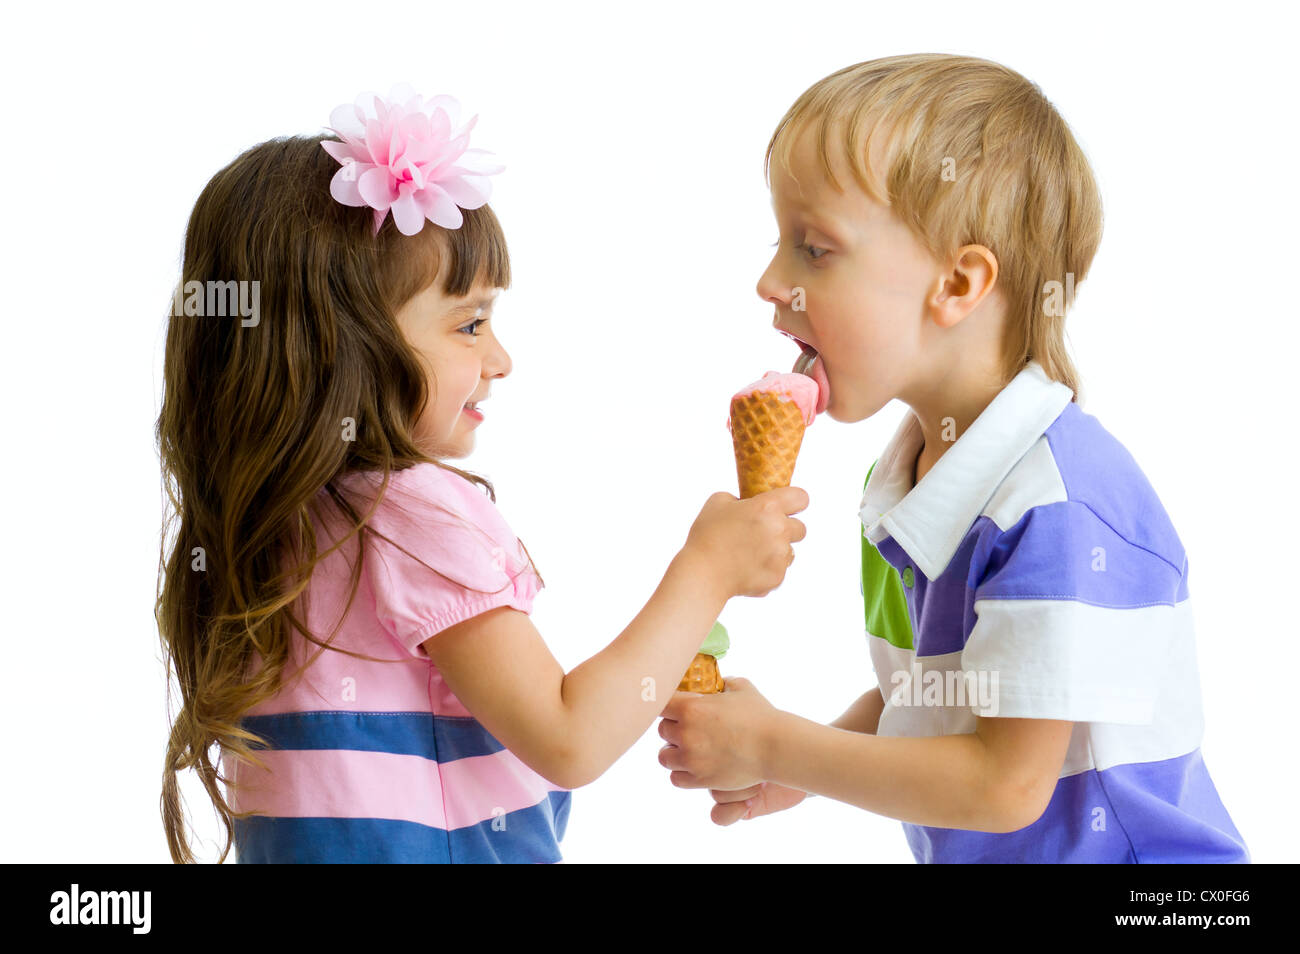 girl shares, gives or feeds boy with her ice cream in studio isolated Stock Photo